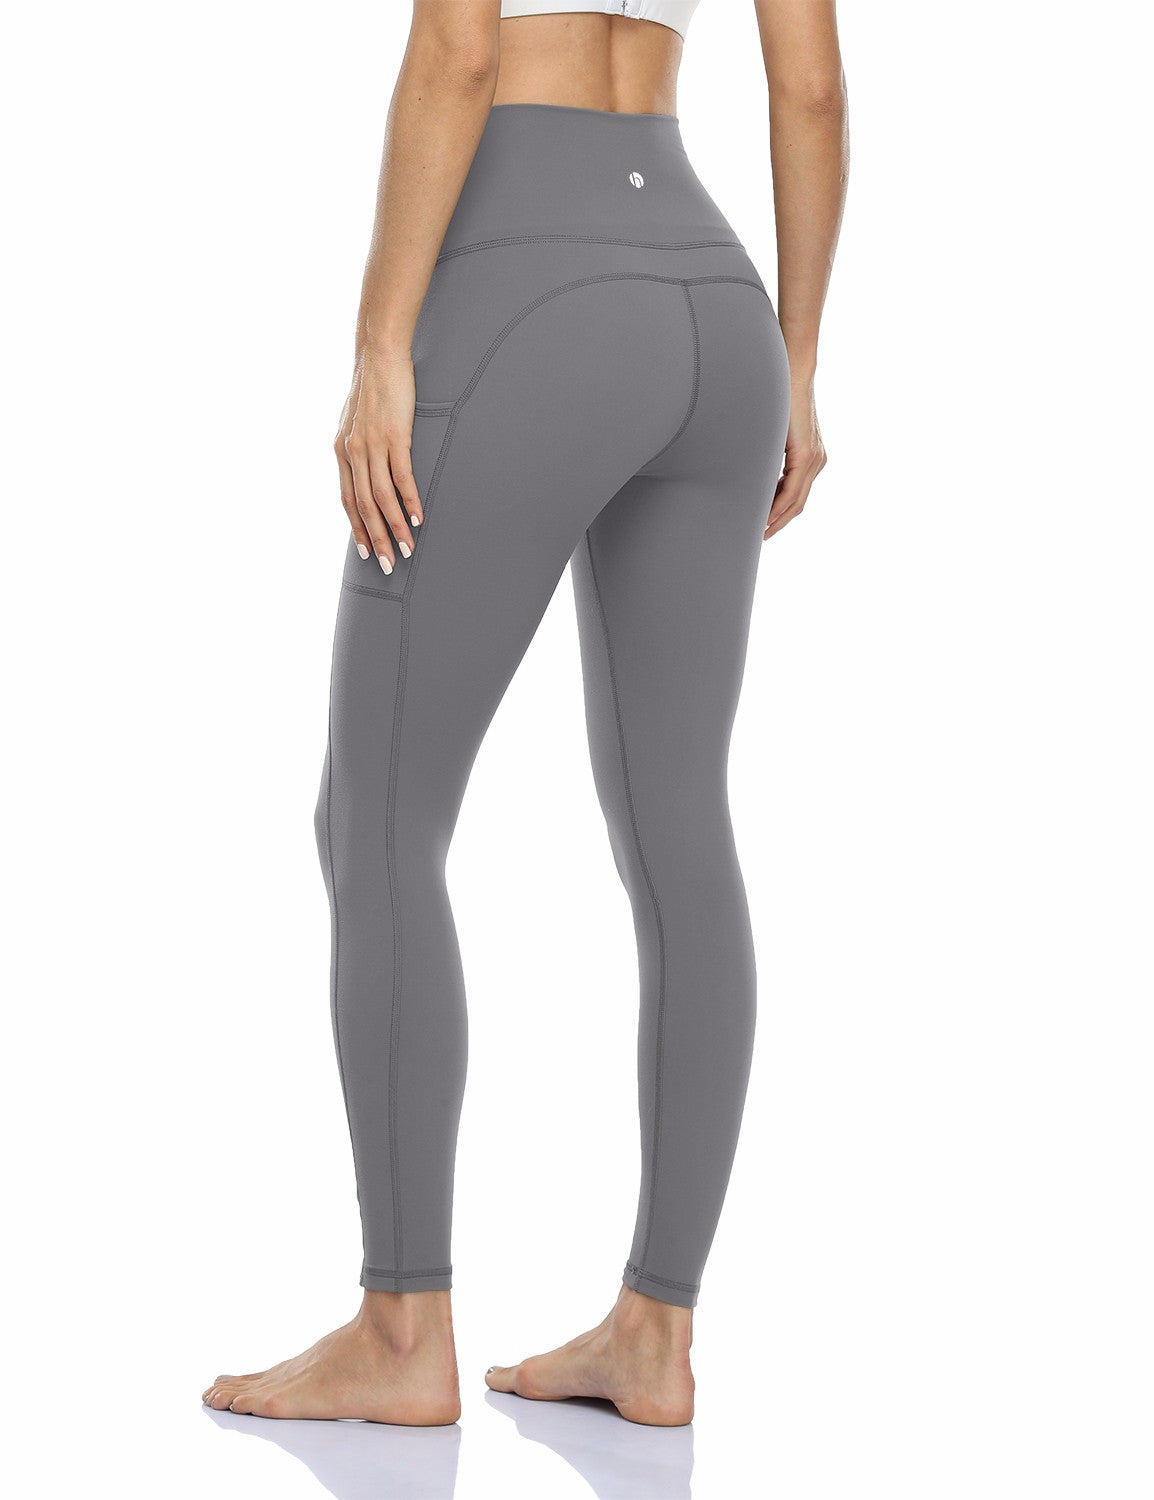  HeyNuts Essential High Waisted Yoga Leggings For Tall Women,  Buttery Soft Full Length Workout Pants 28 Carbon Dust L